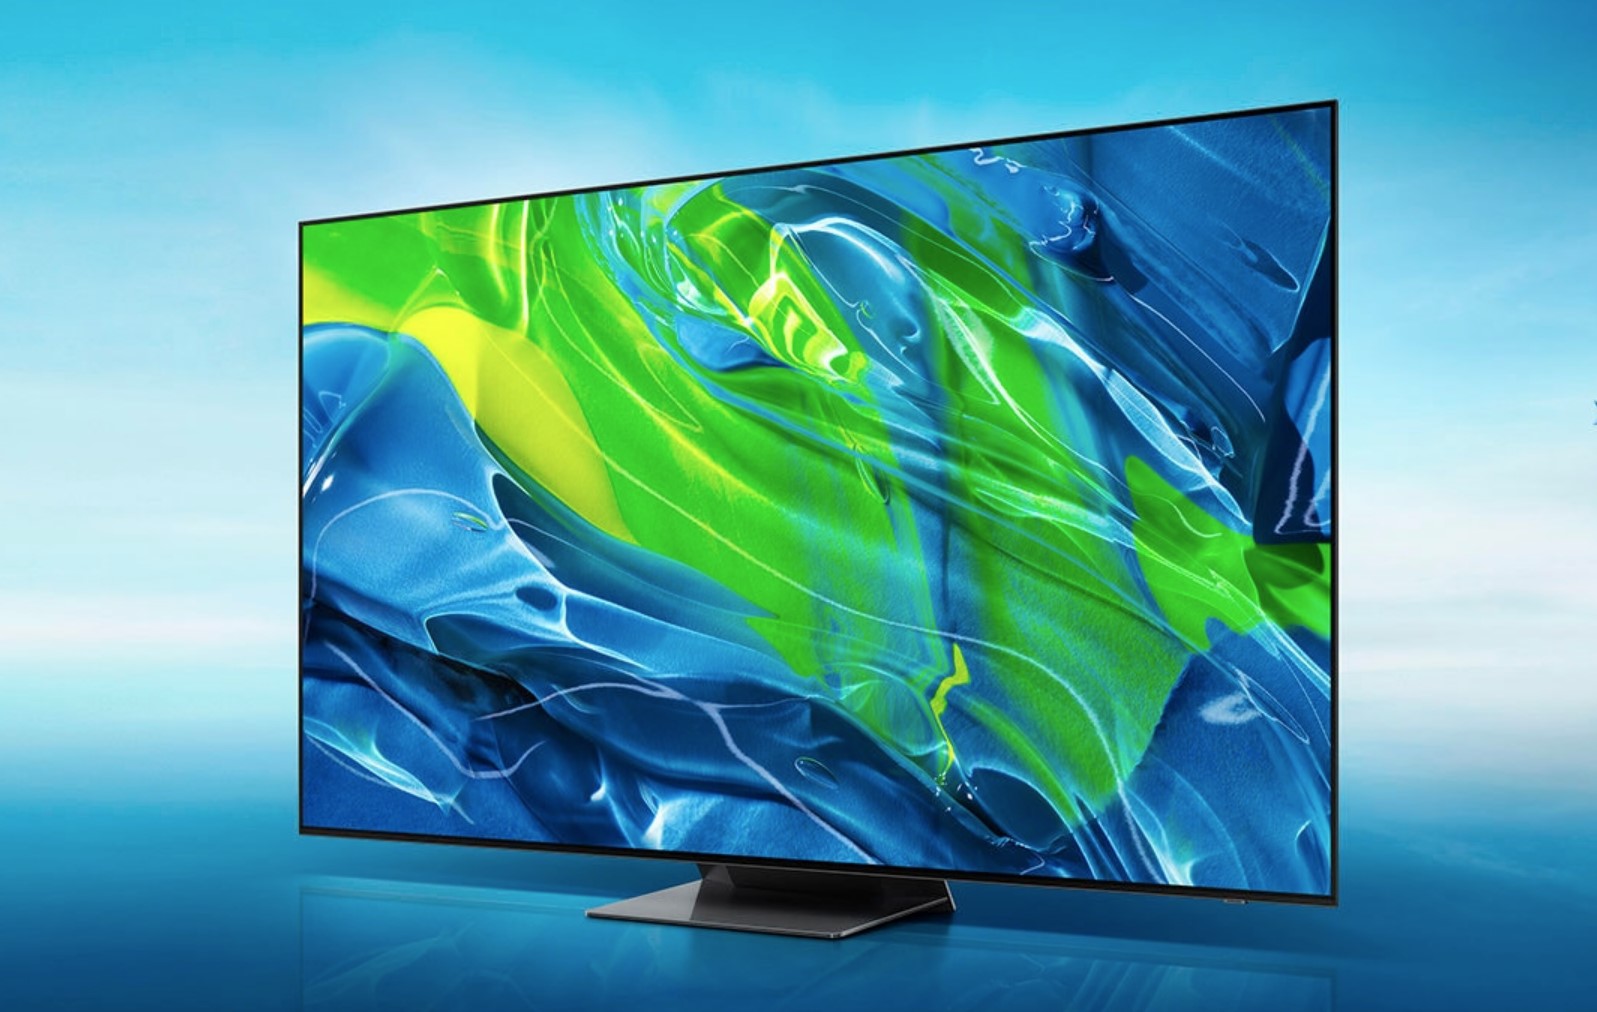 Samsung OLED TVs – an about turn